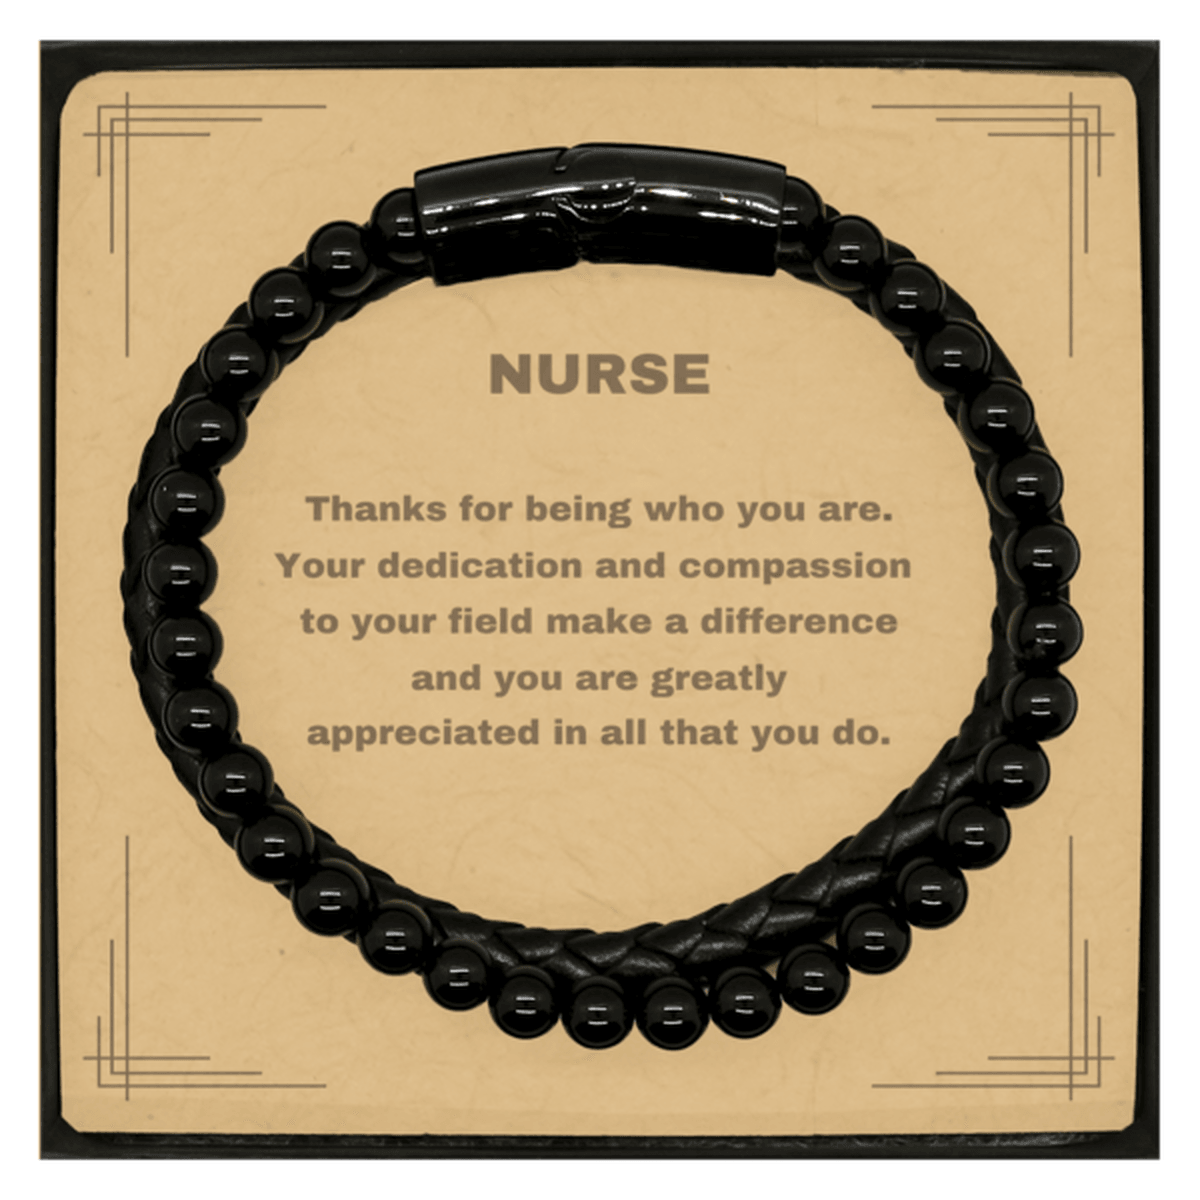 Nurse Black Braided Leather Stone Bracelet - Thanks for being who you are - Birthday Christmas Jewelry Gifts Coworkers Colleague Boss - Mallard Moon Gift Shop